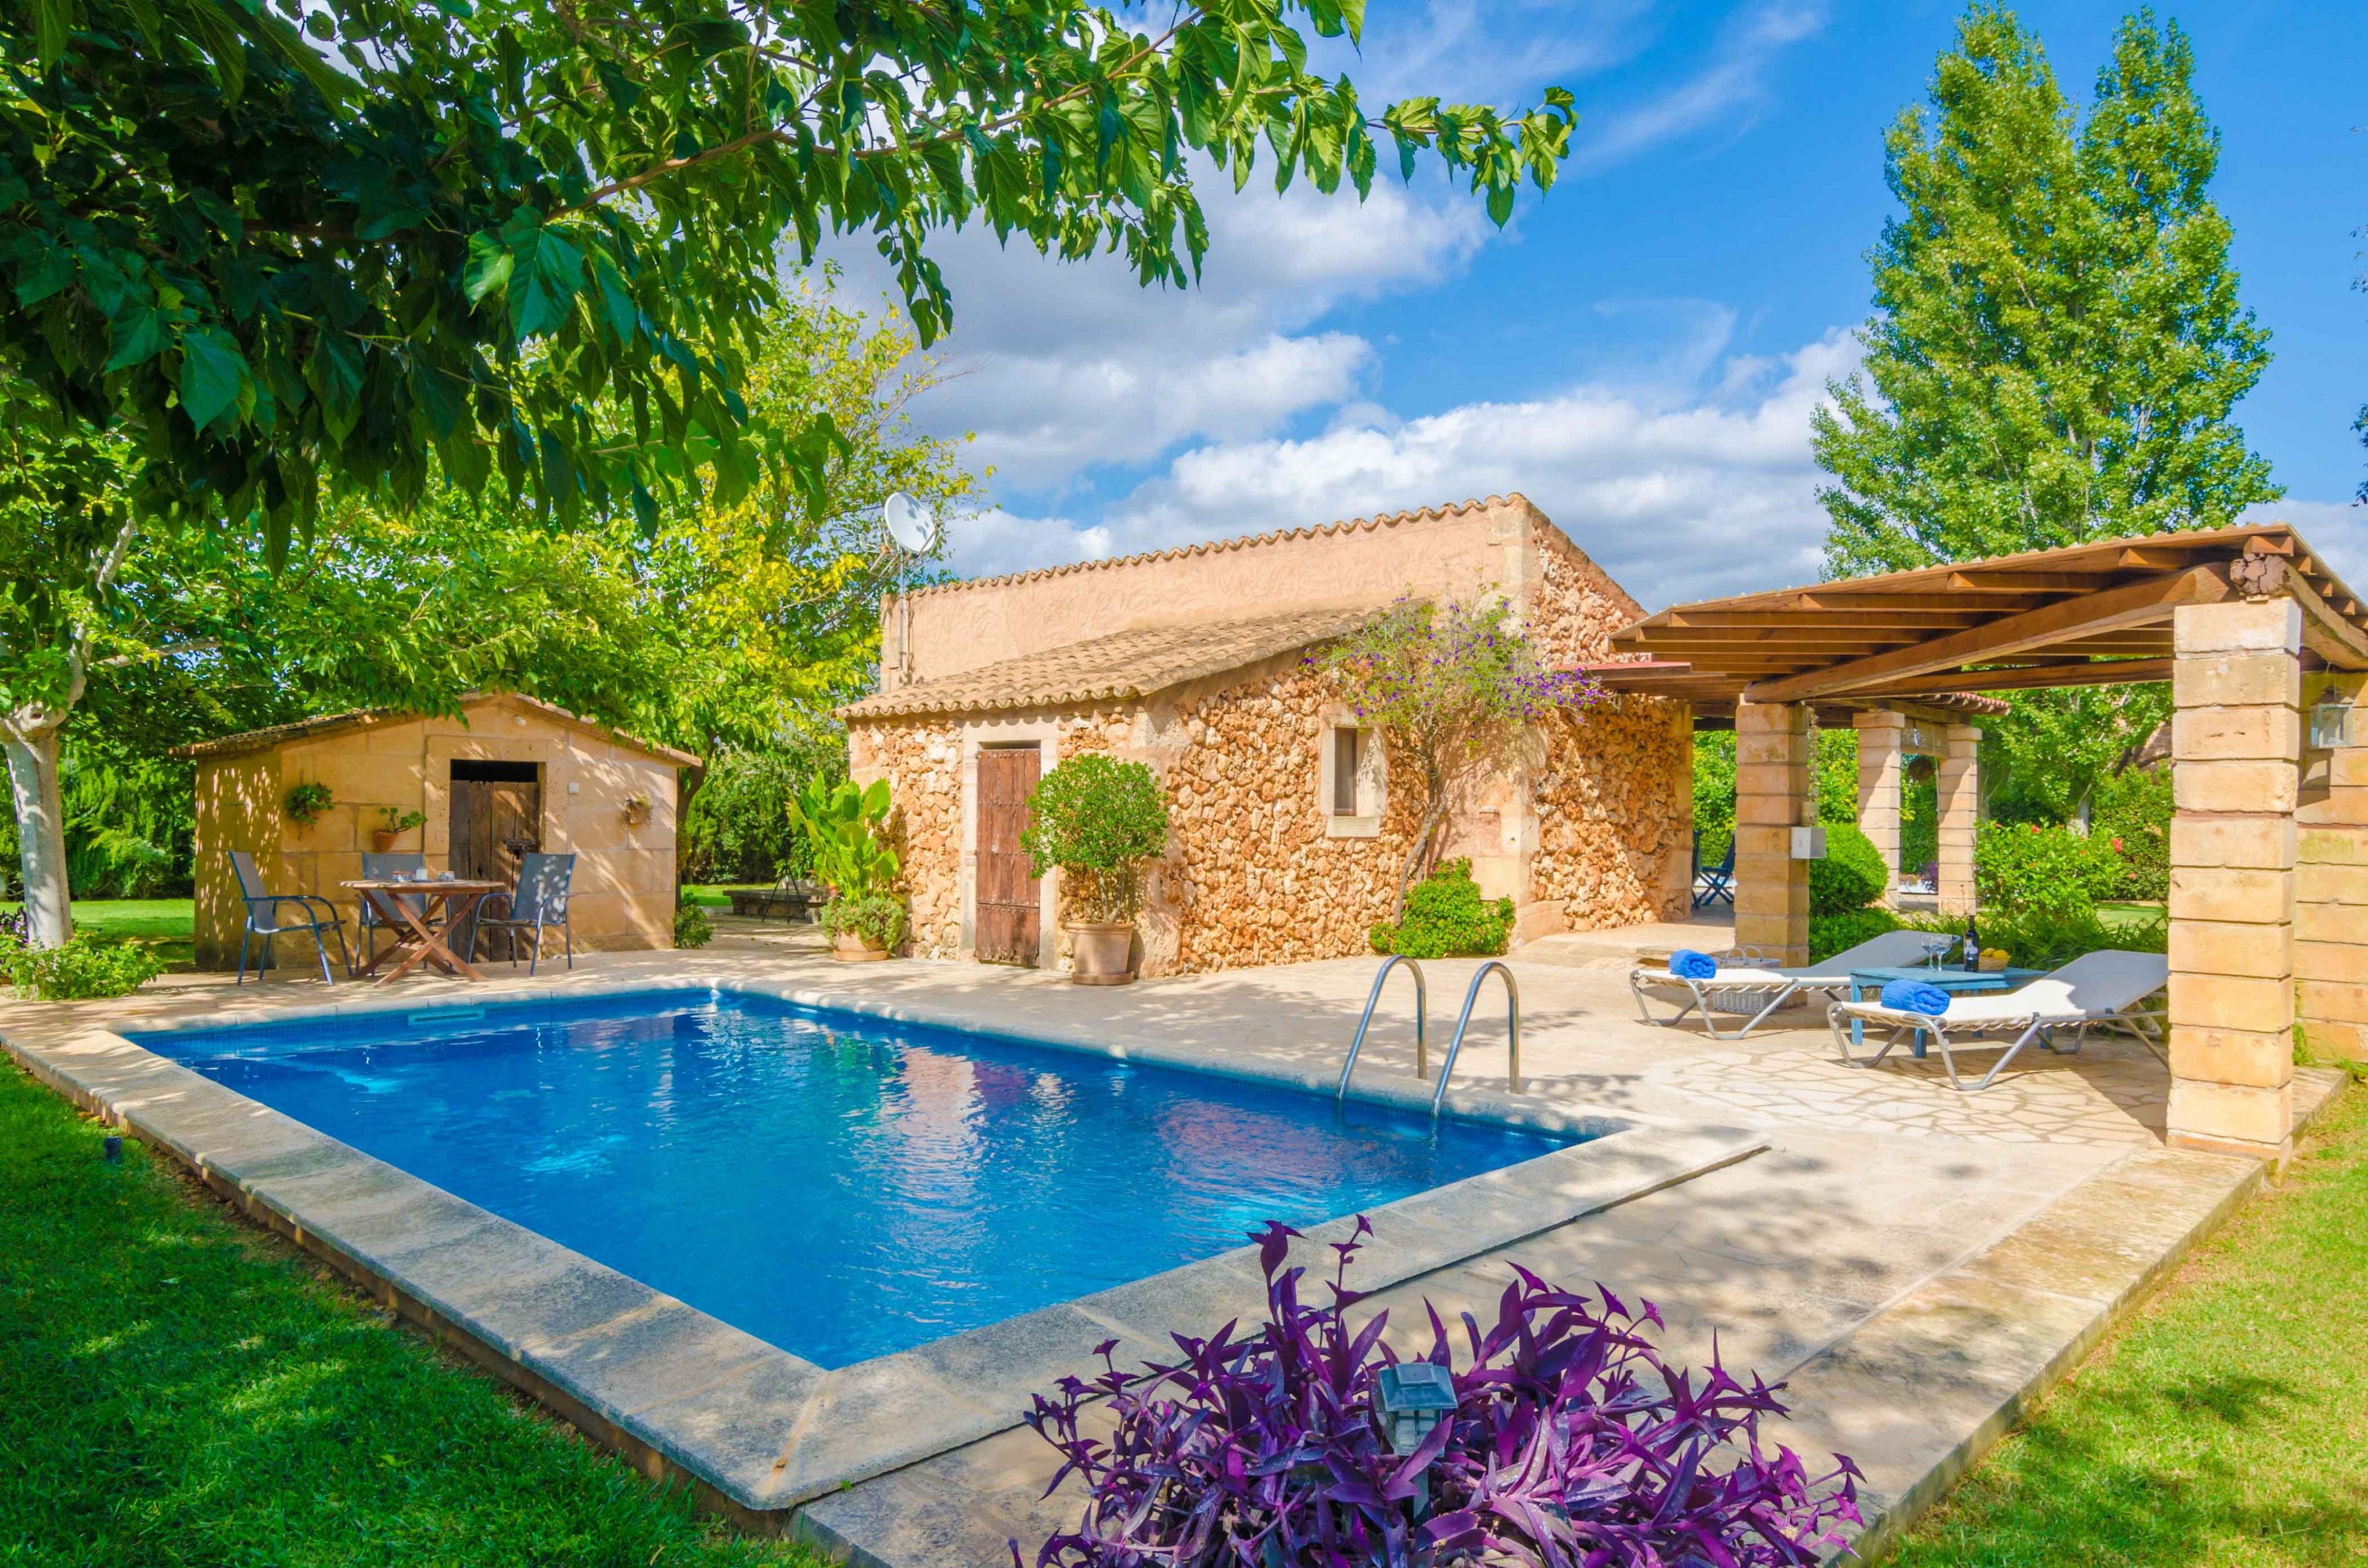 Property Image 1 - SES TENDES - Villa with private pool and beautiful garden. Free WIFI